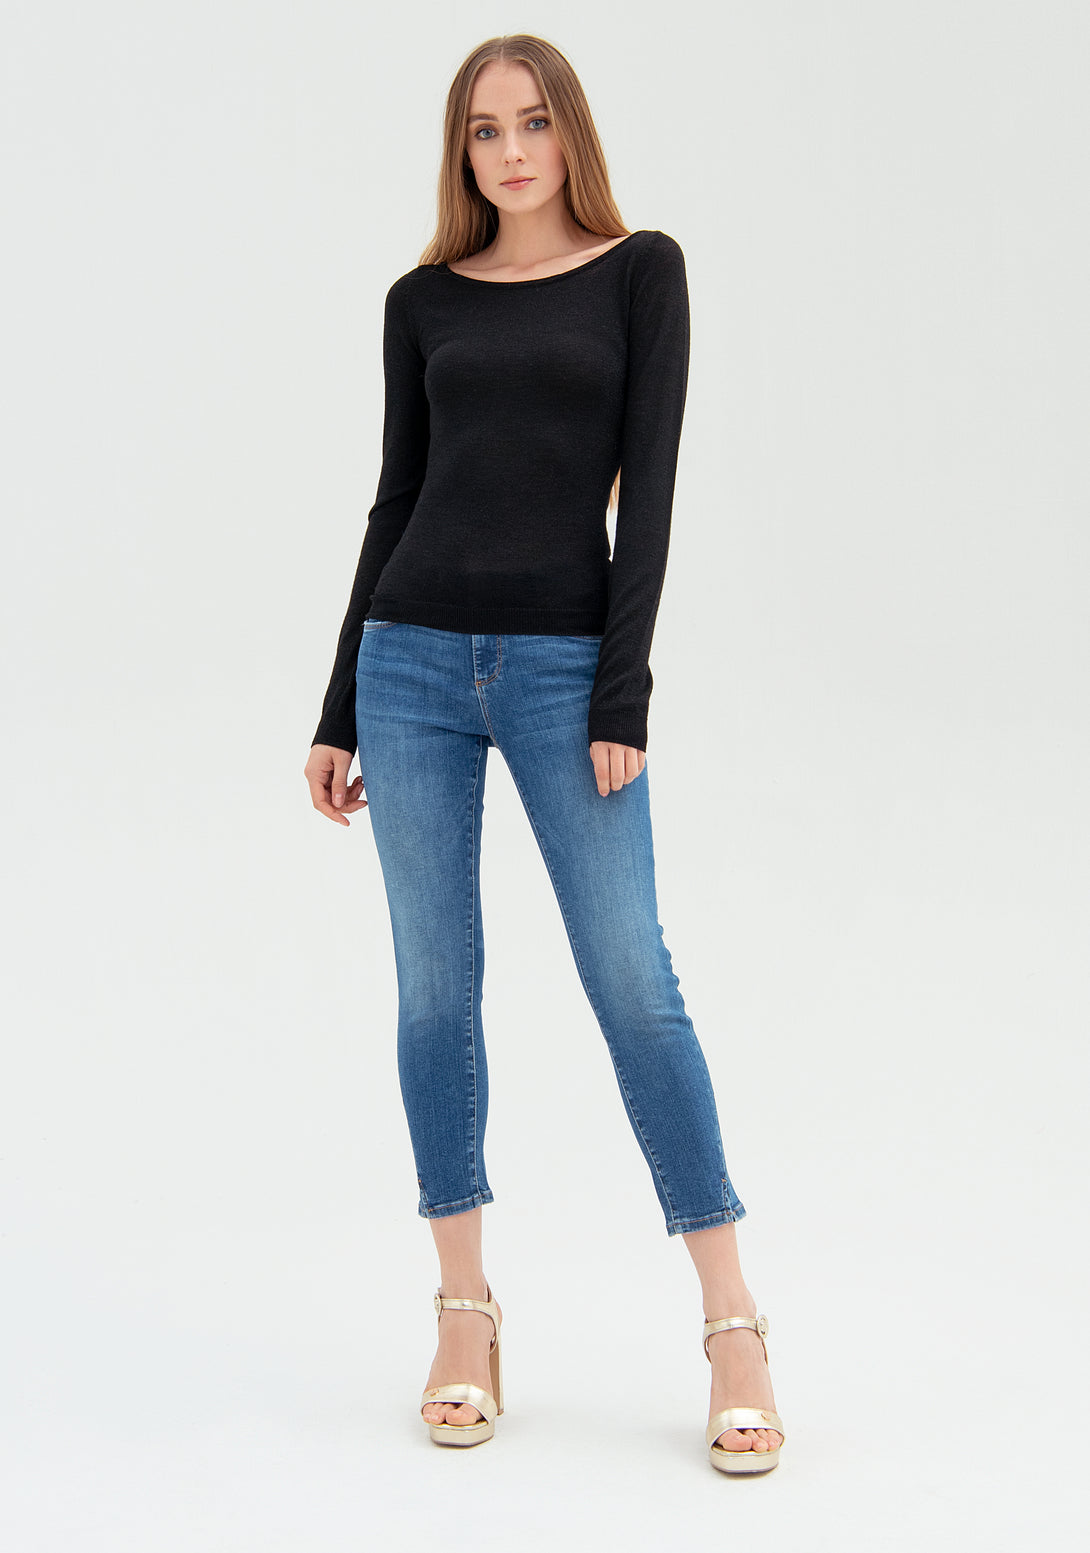 Knitwear tight fit made in viscose